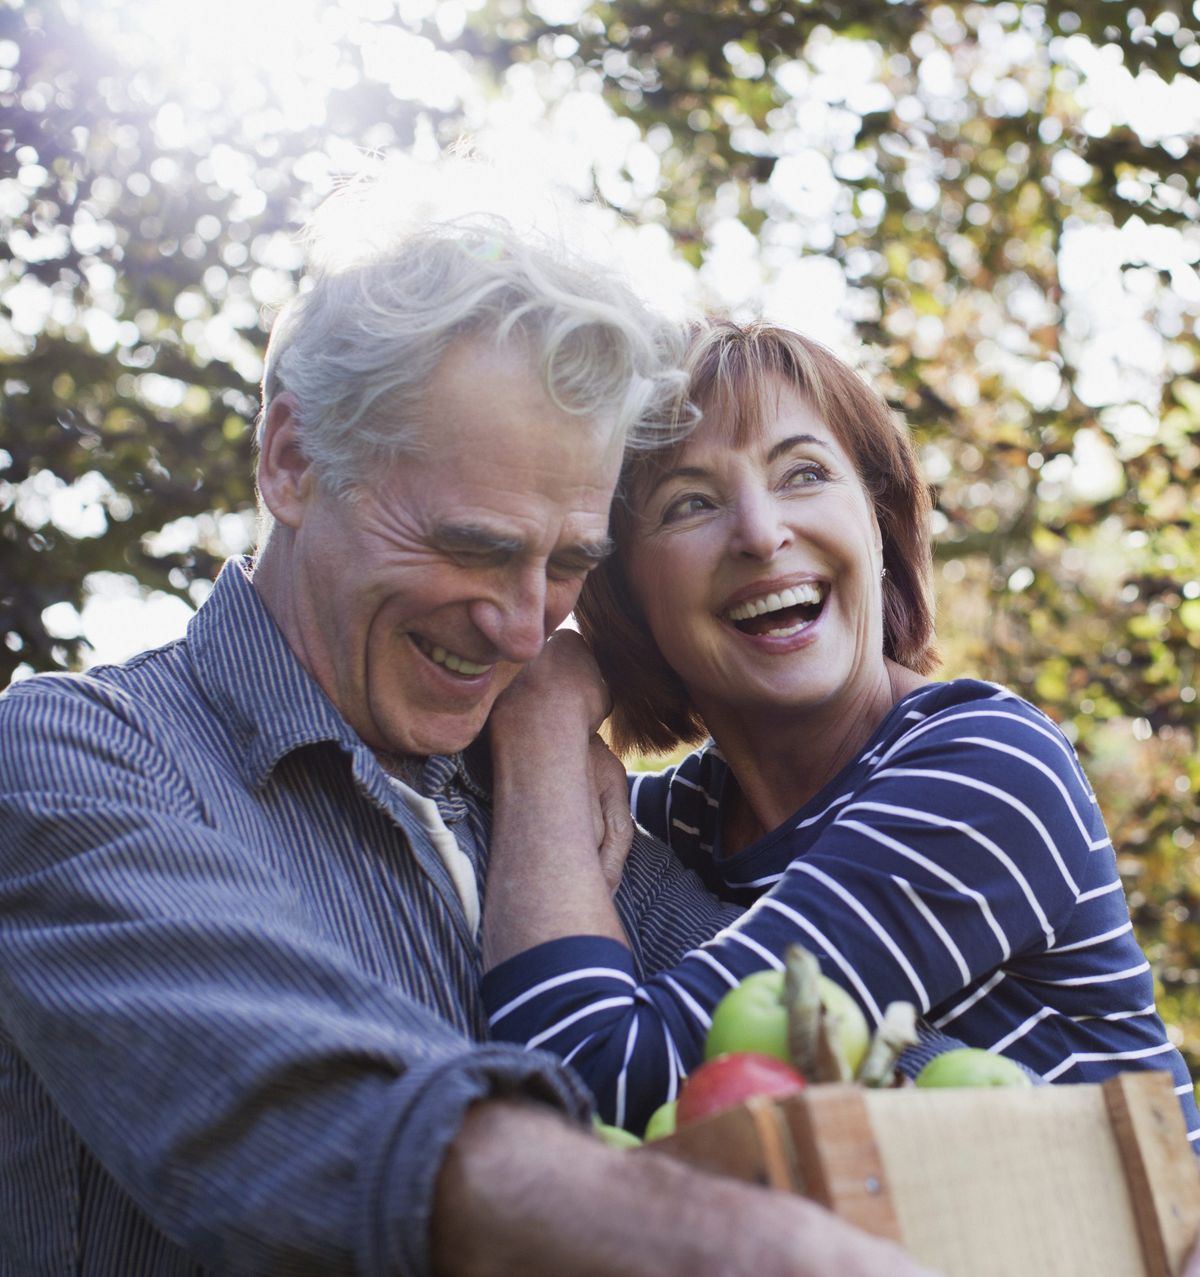 Over 50s dating made easy: an expert guide to finding midlife love.